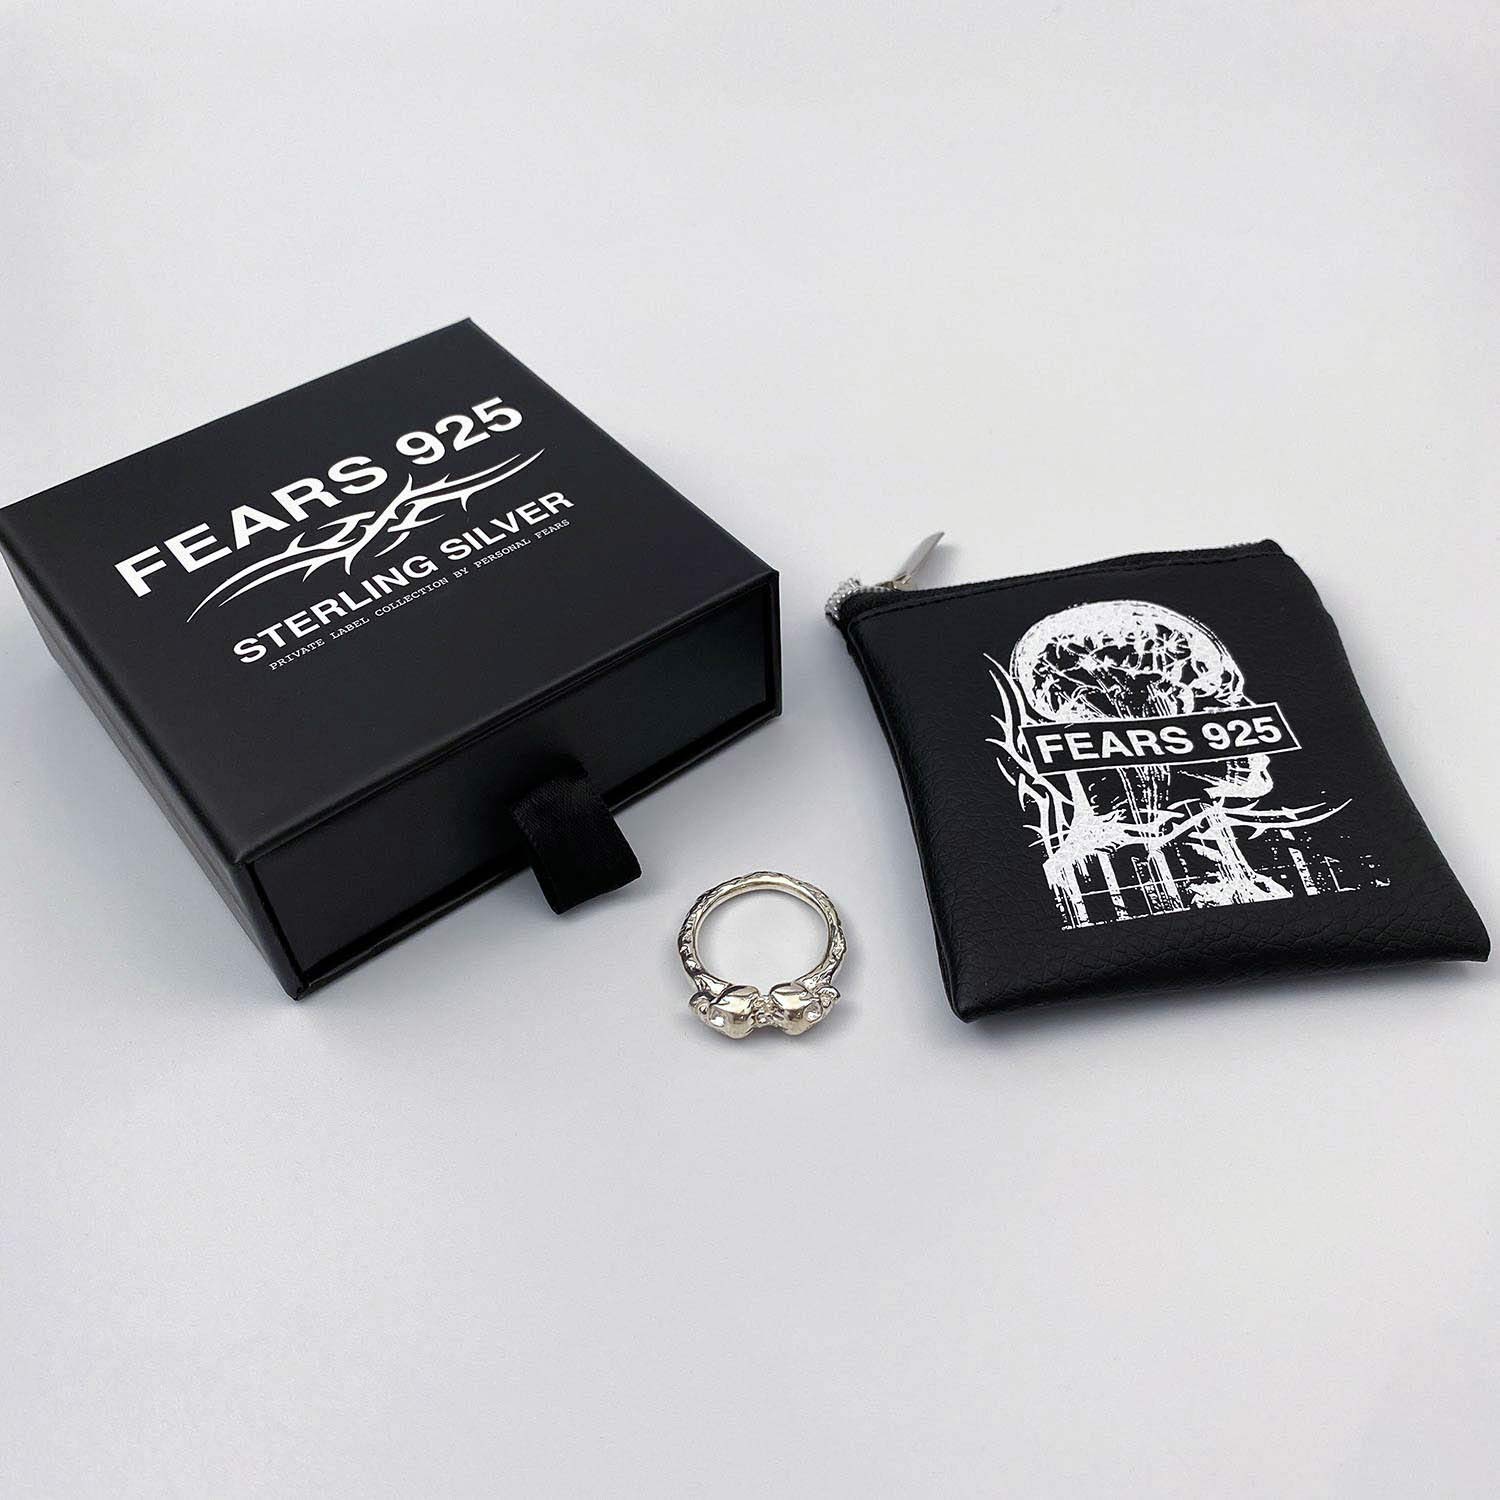 Personal Fears Shared Thoughts Ring In Sterling Silver With Box and Bag